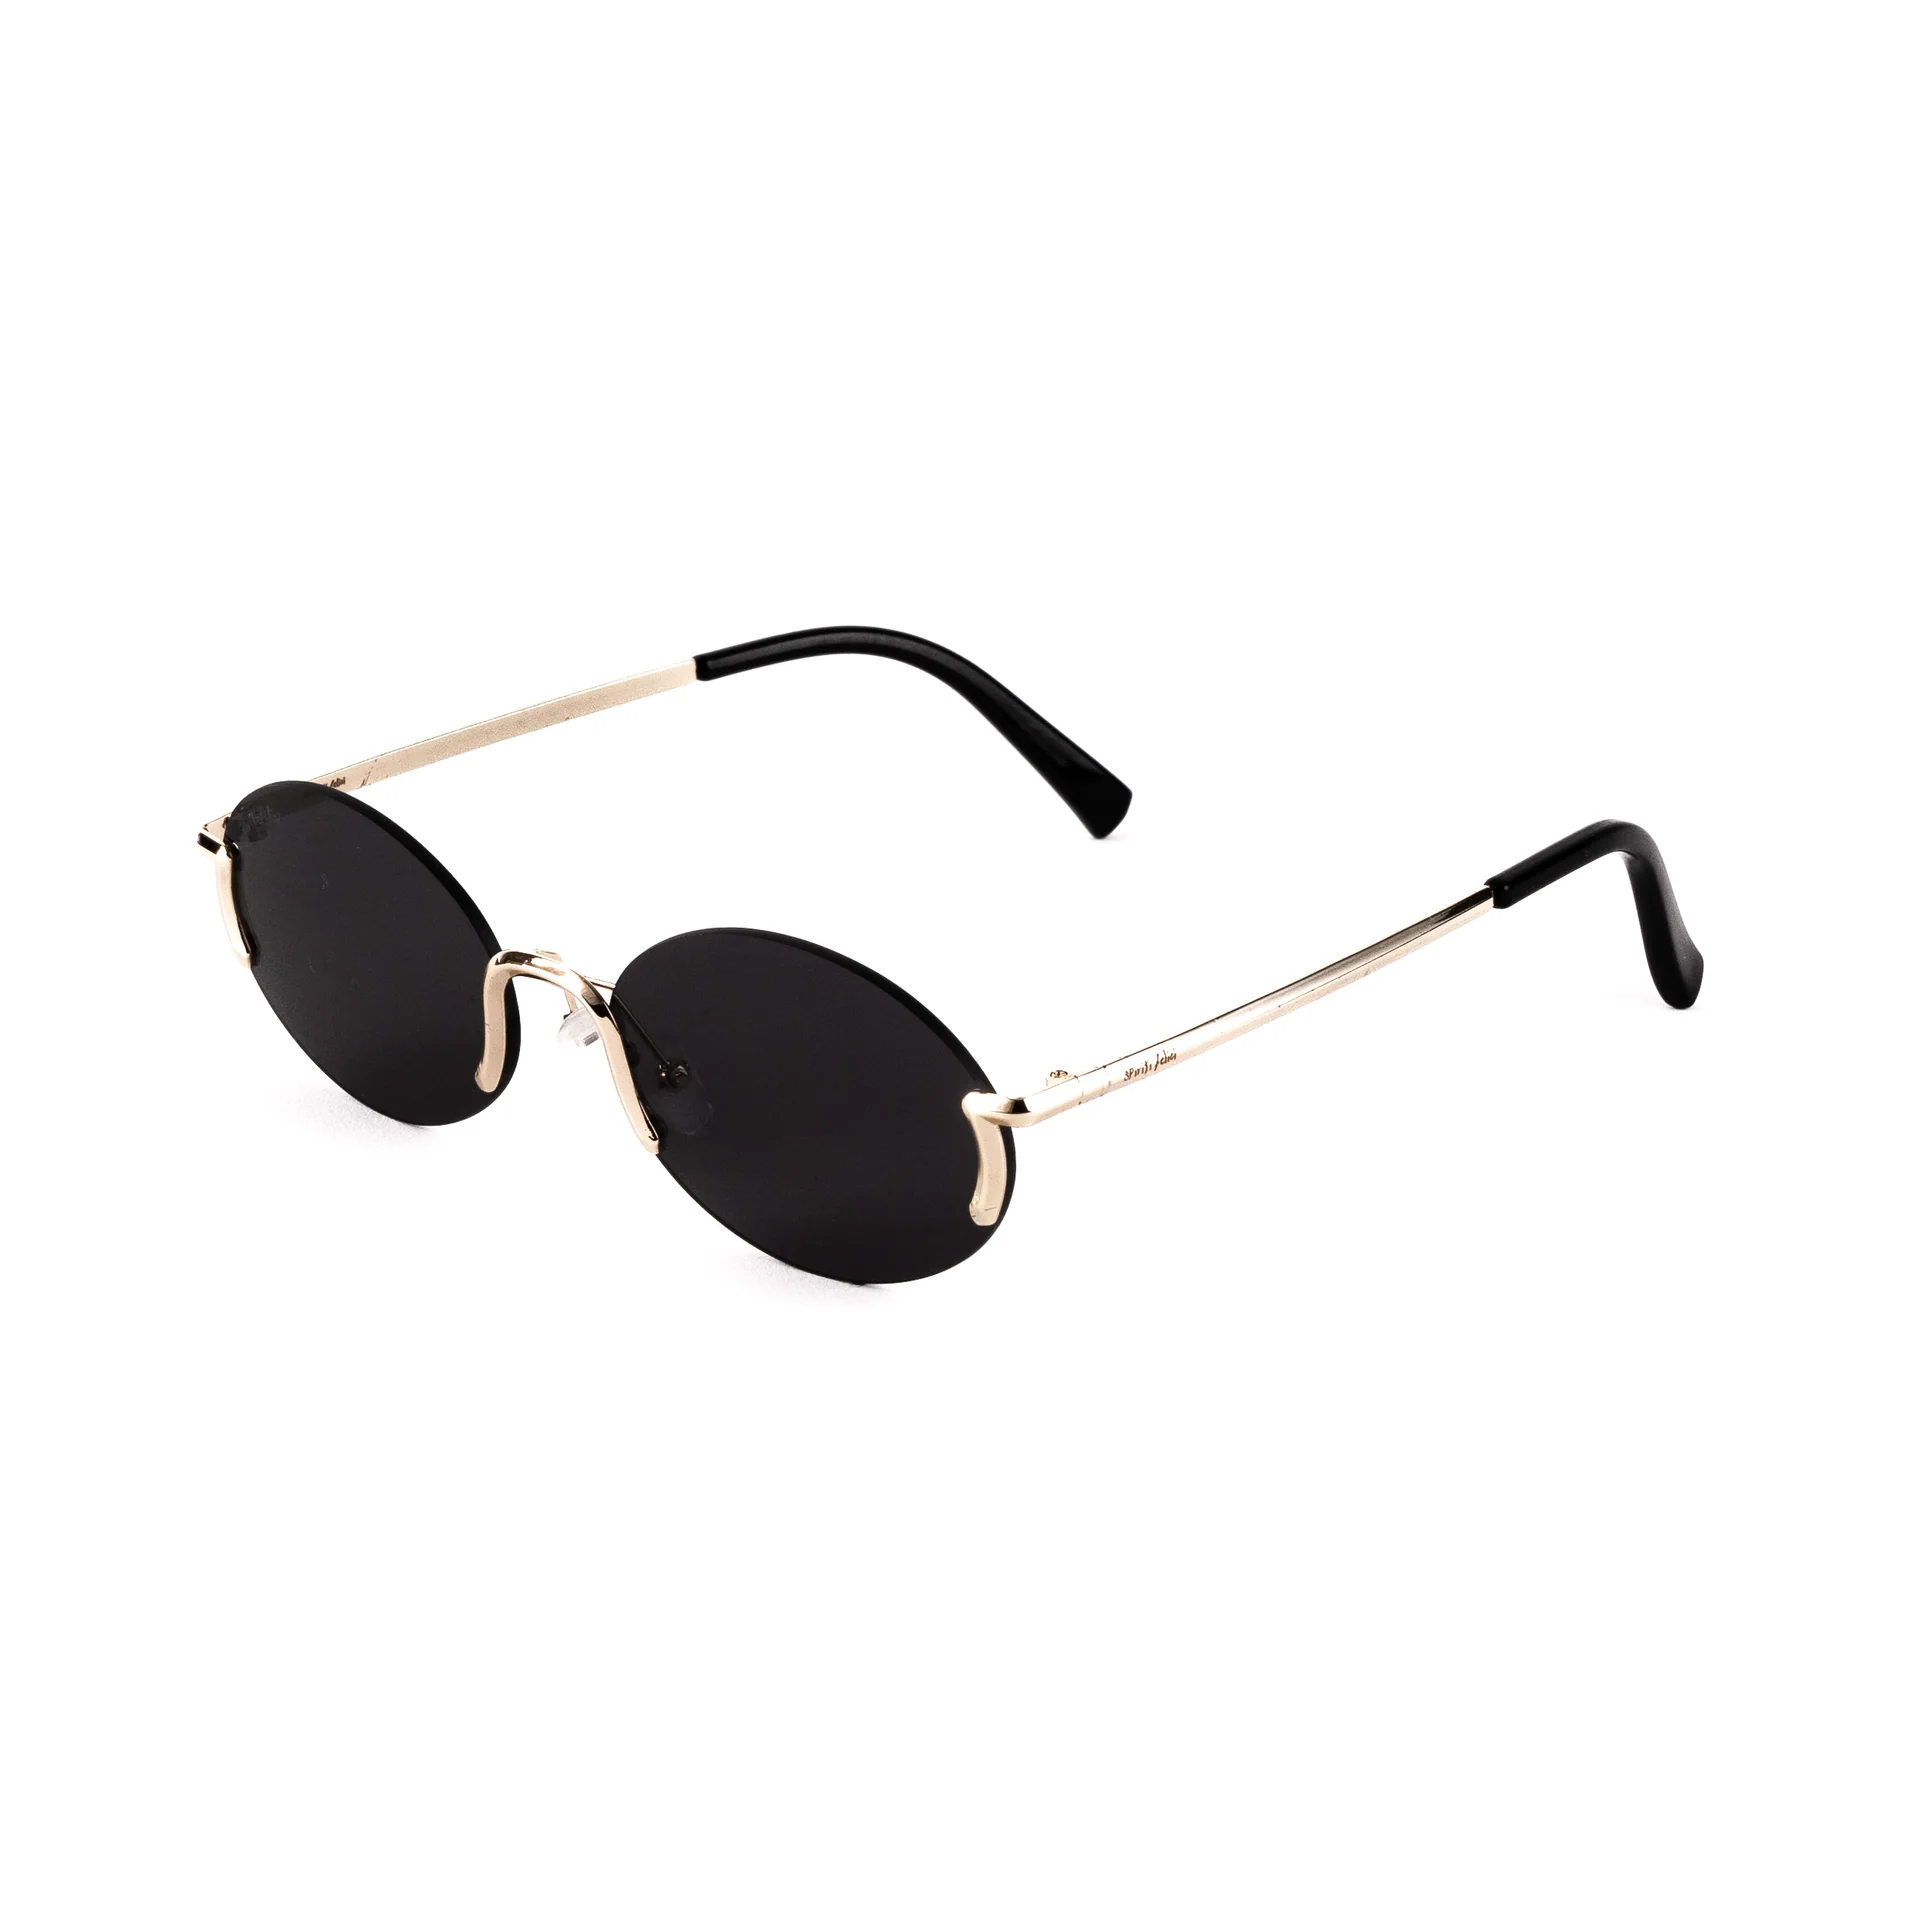 Buy NEW RADICAL Sunglasses from Spiriti Felici available online at VEND. Explore more product category collections now